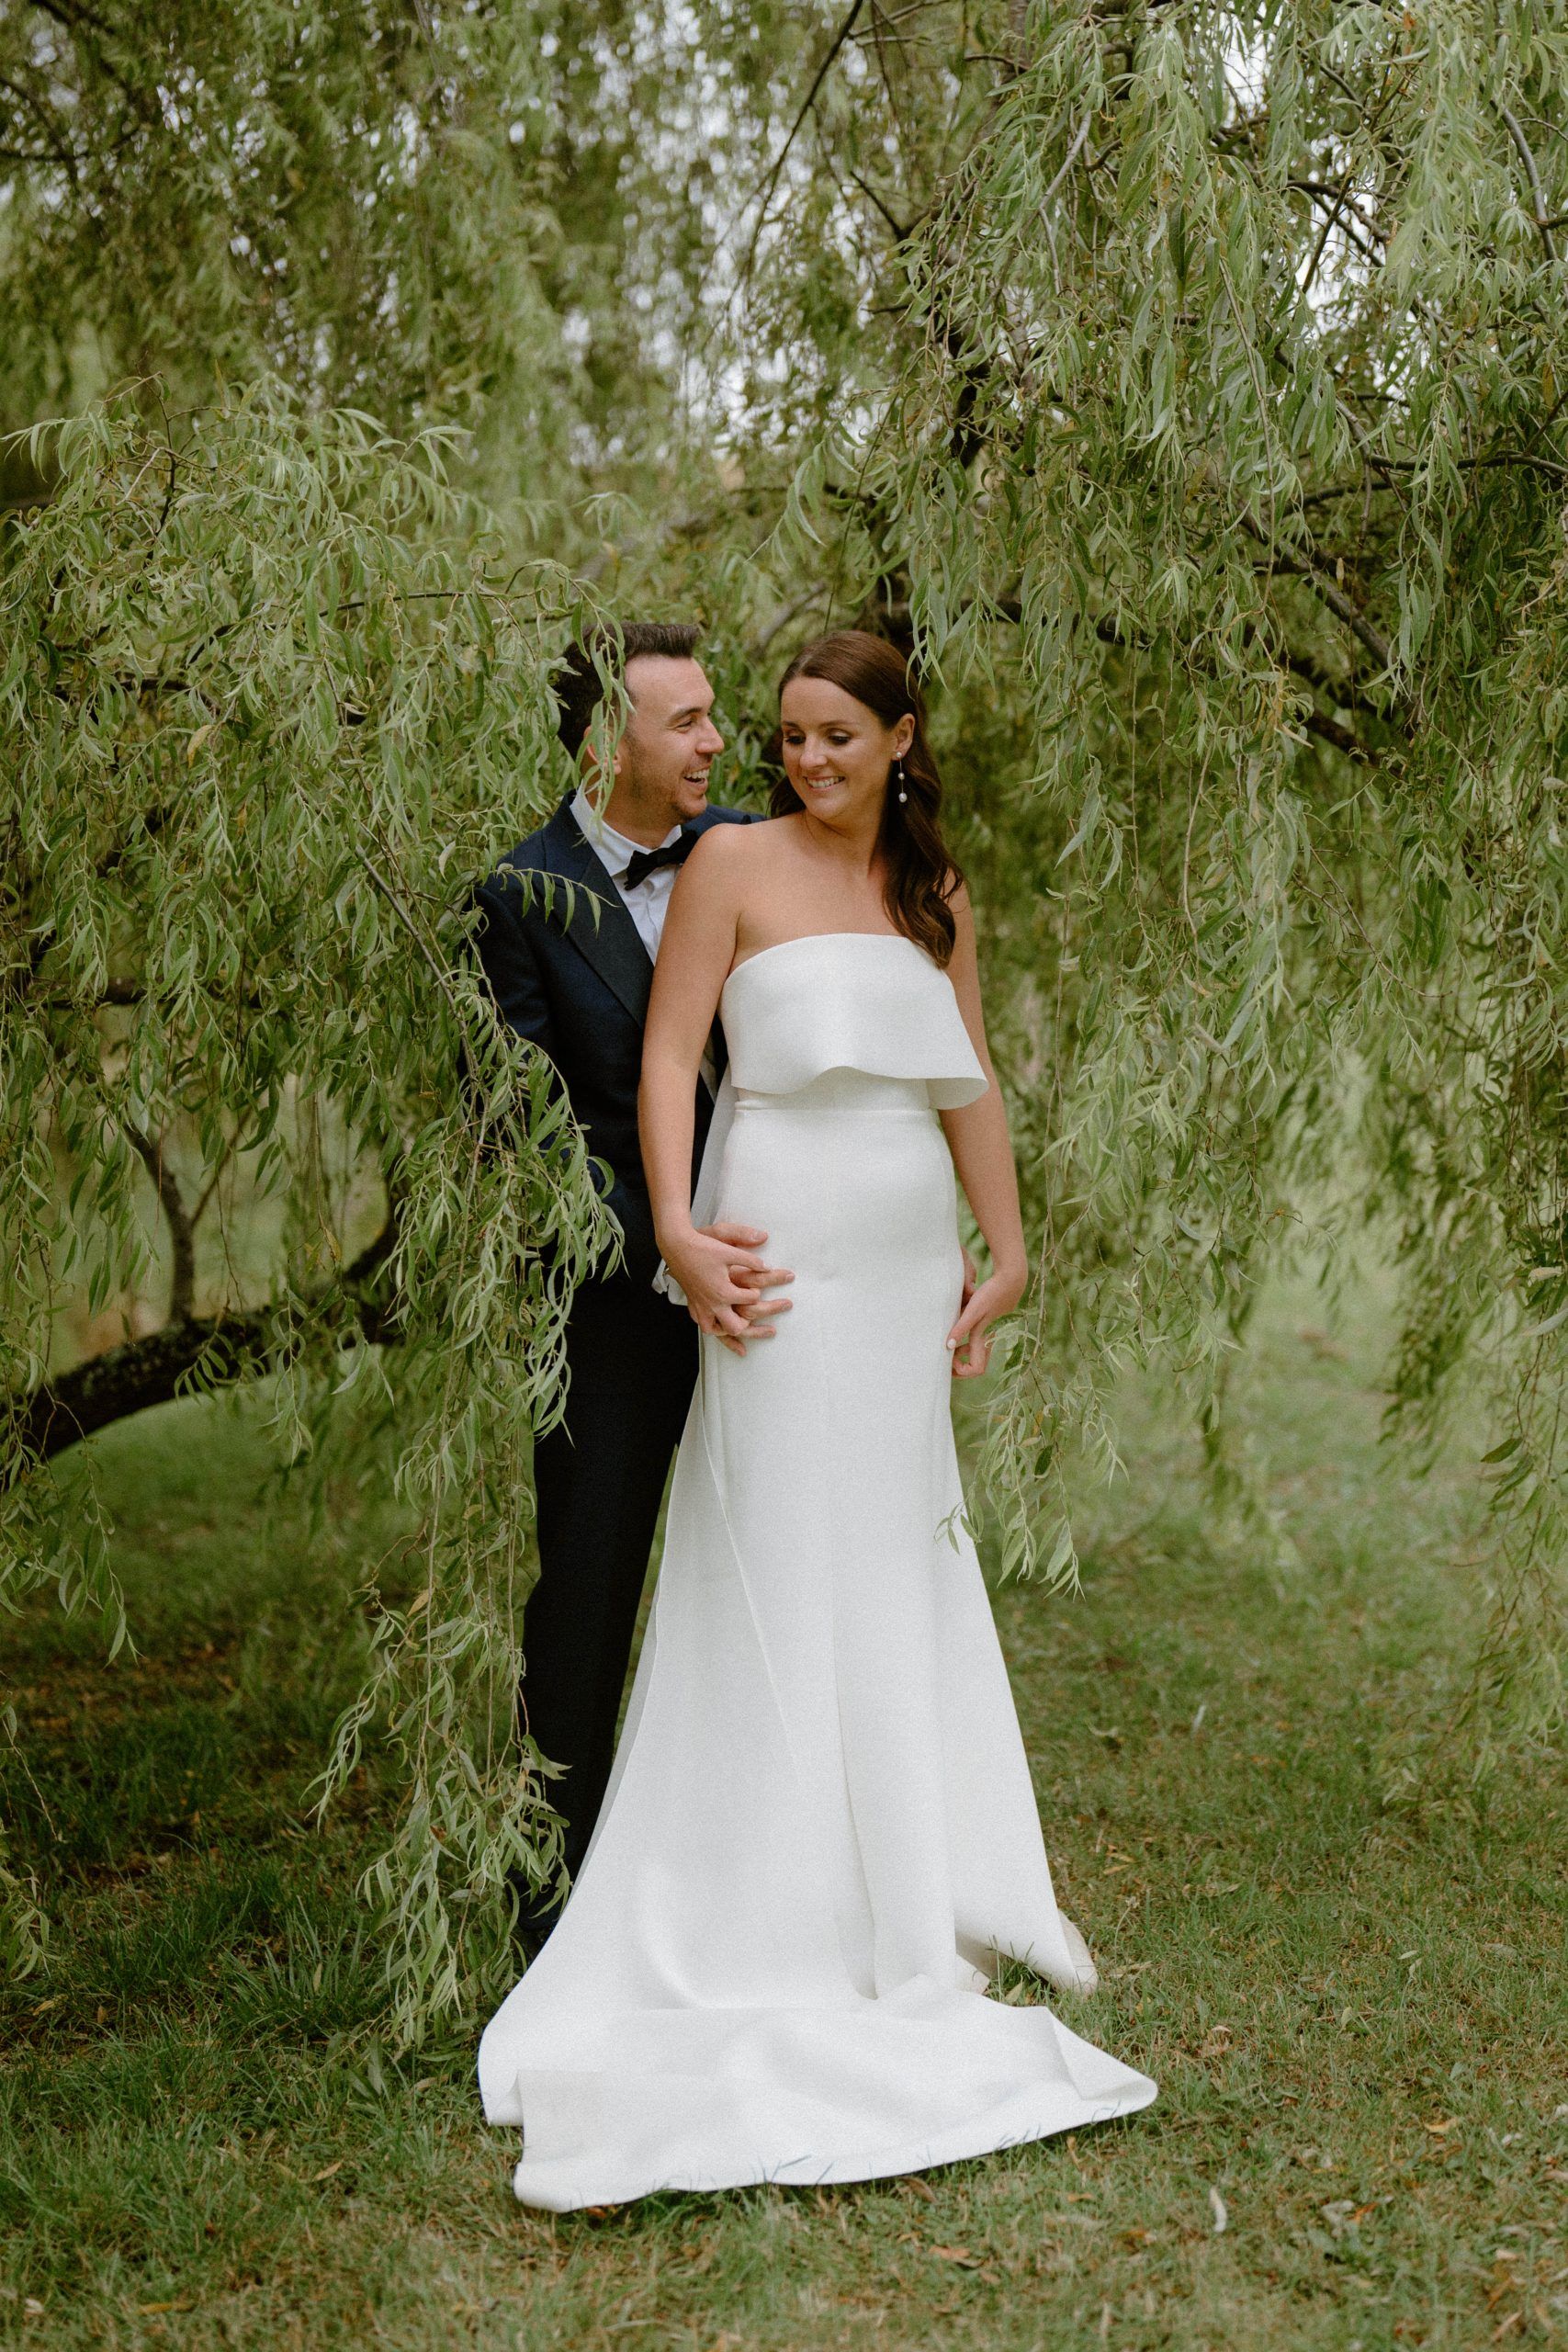 bendooley book barn wedding of isabella and brandon in front of a willow tree